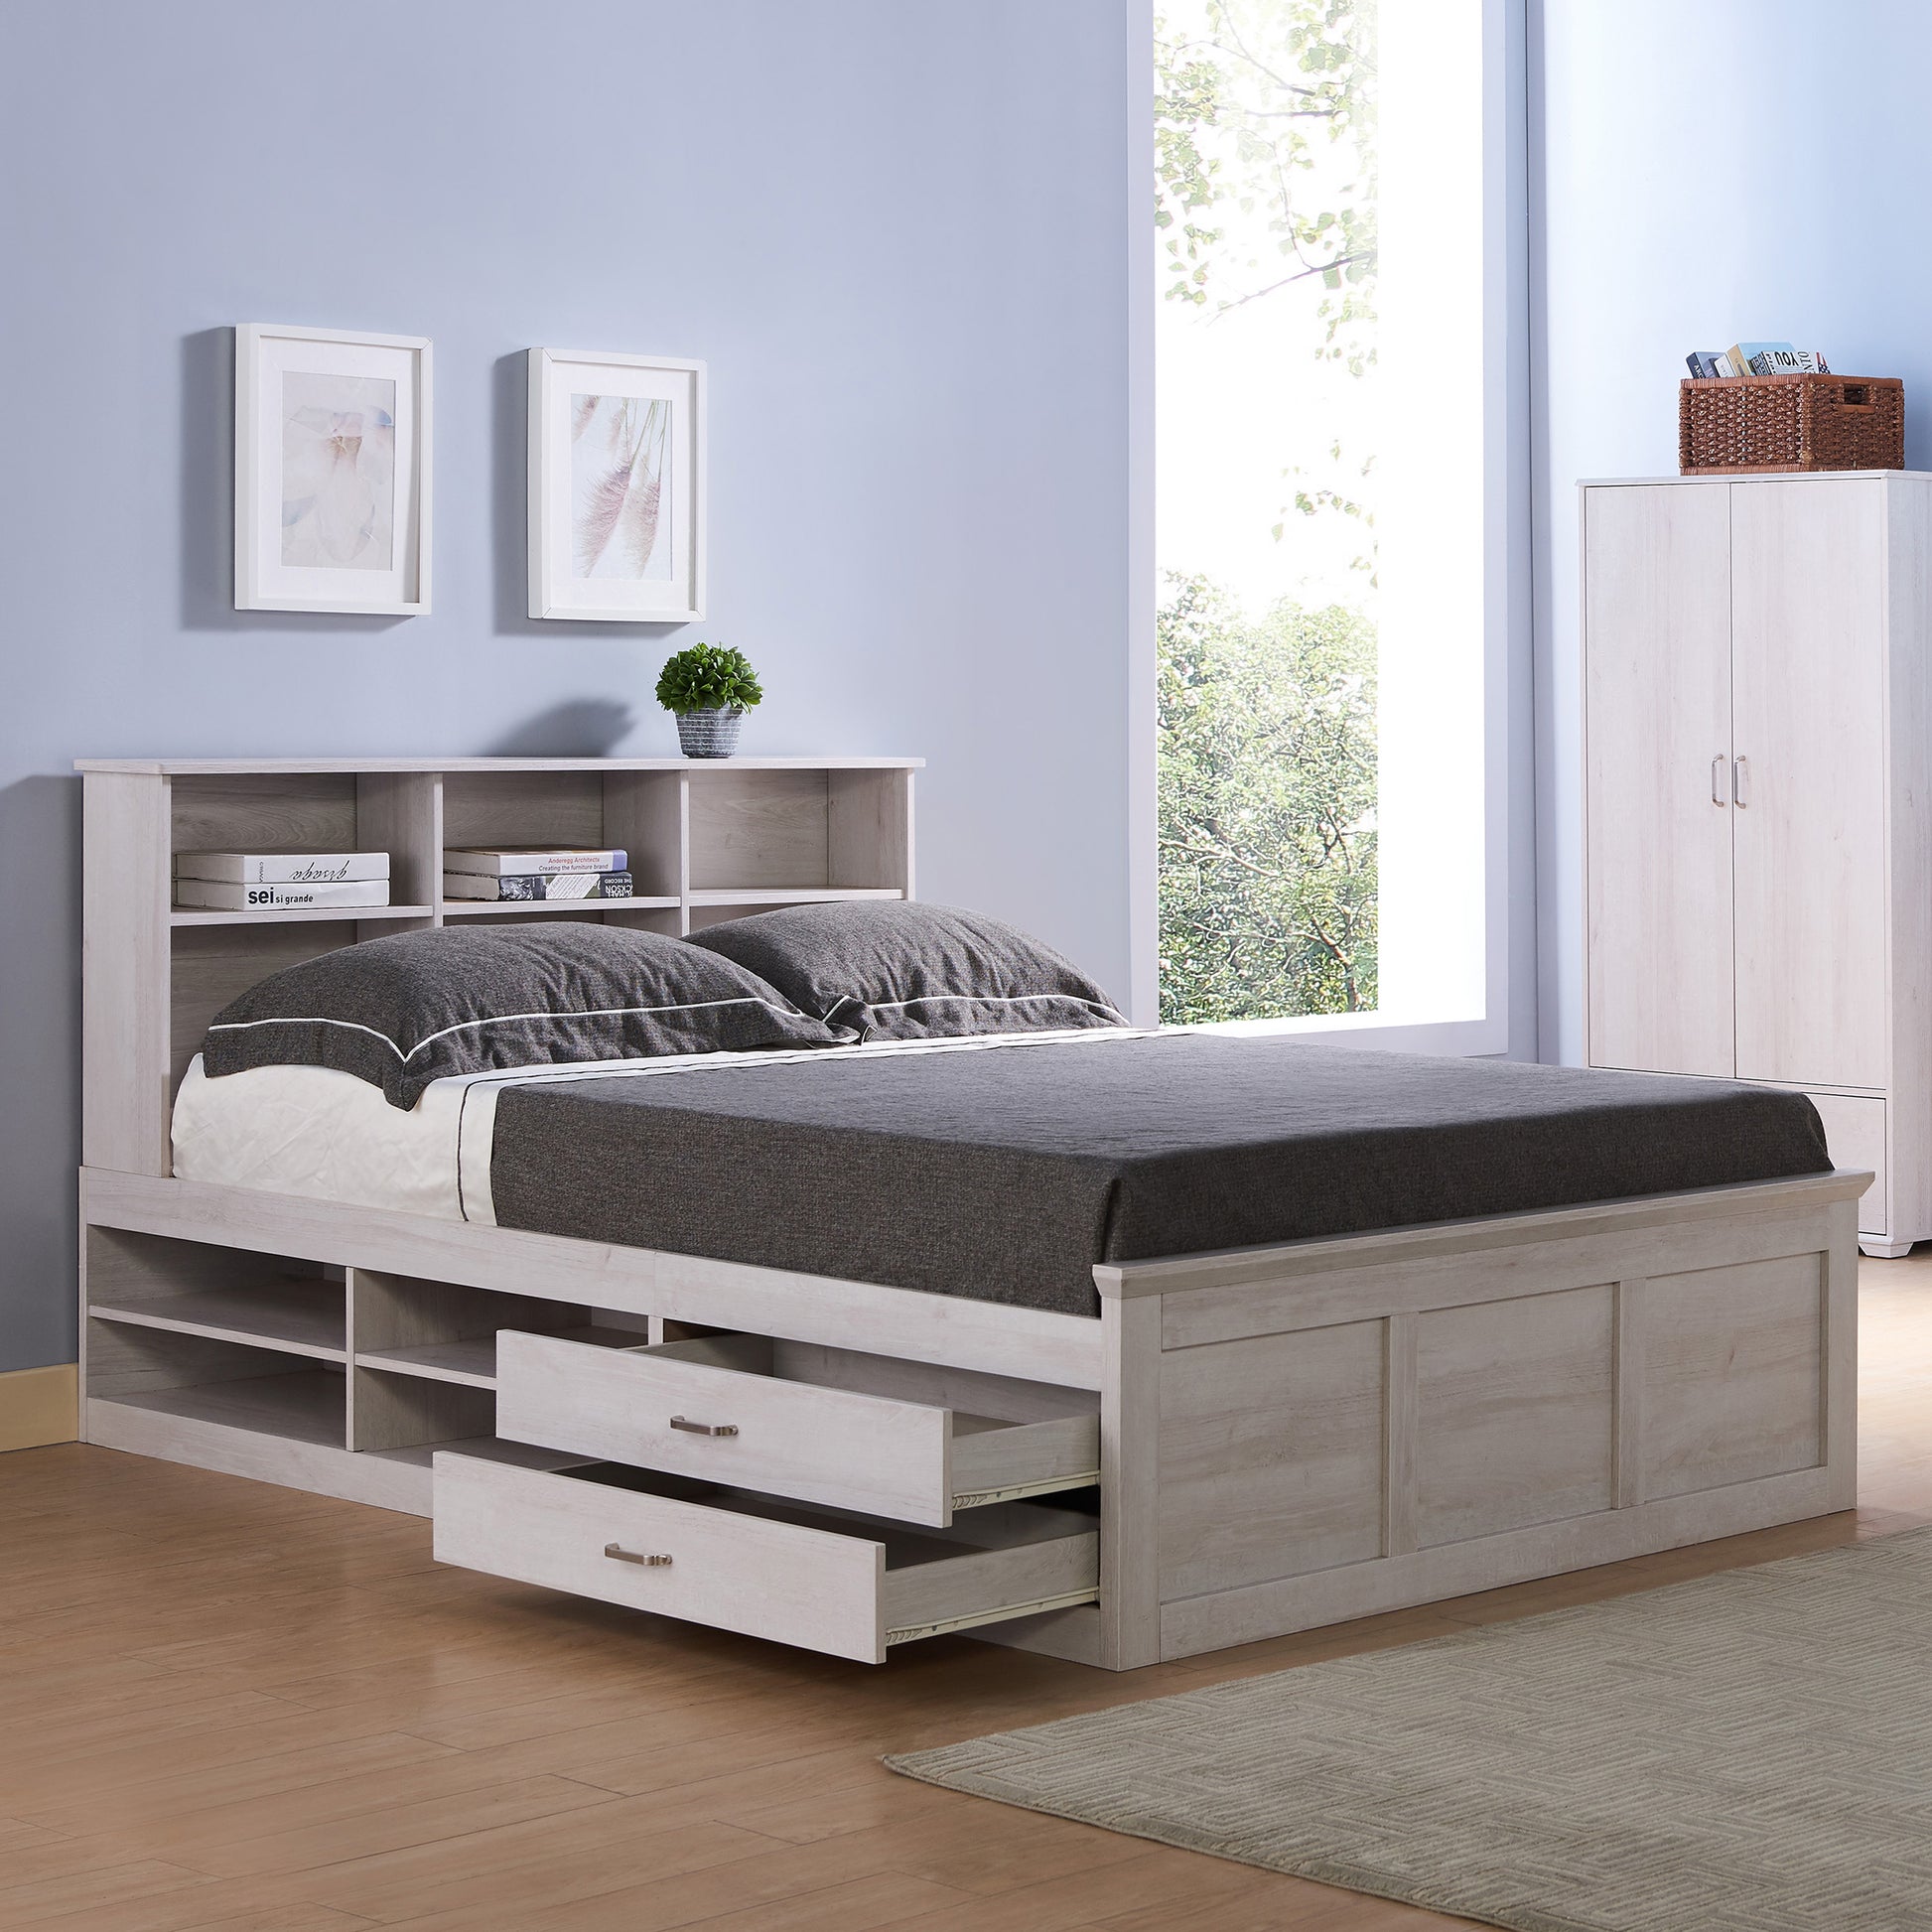 Right angled transitional two-drawer four-shelf platform storage bed shown with optional headboard and drawers open in a bedroom with accessories